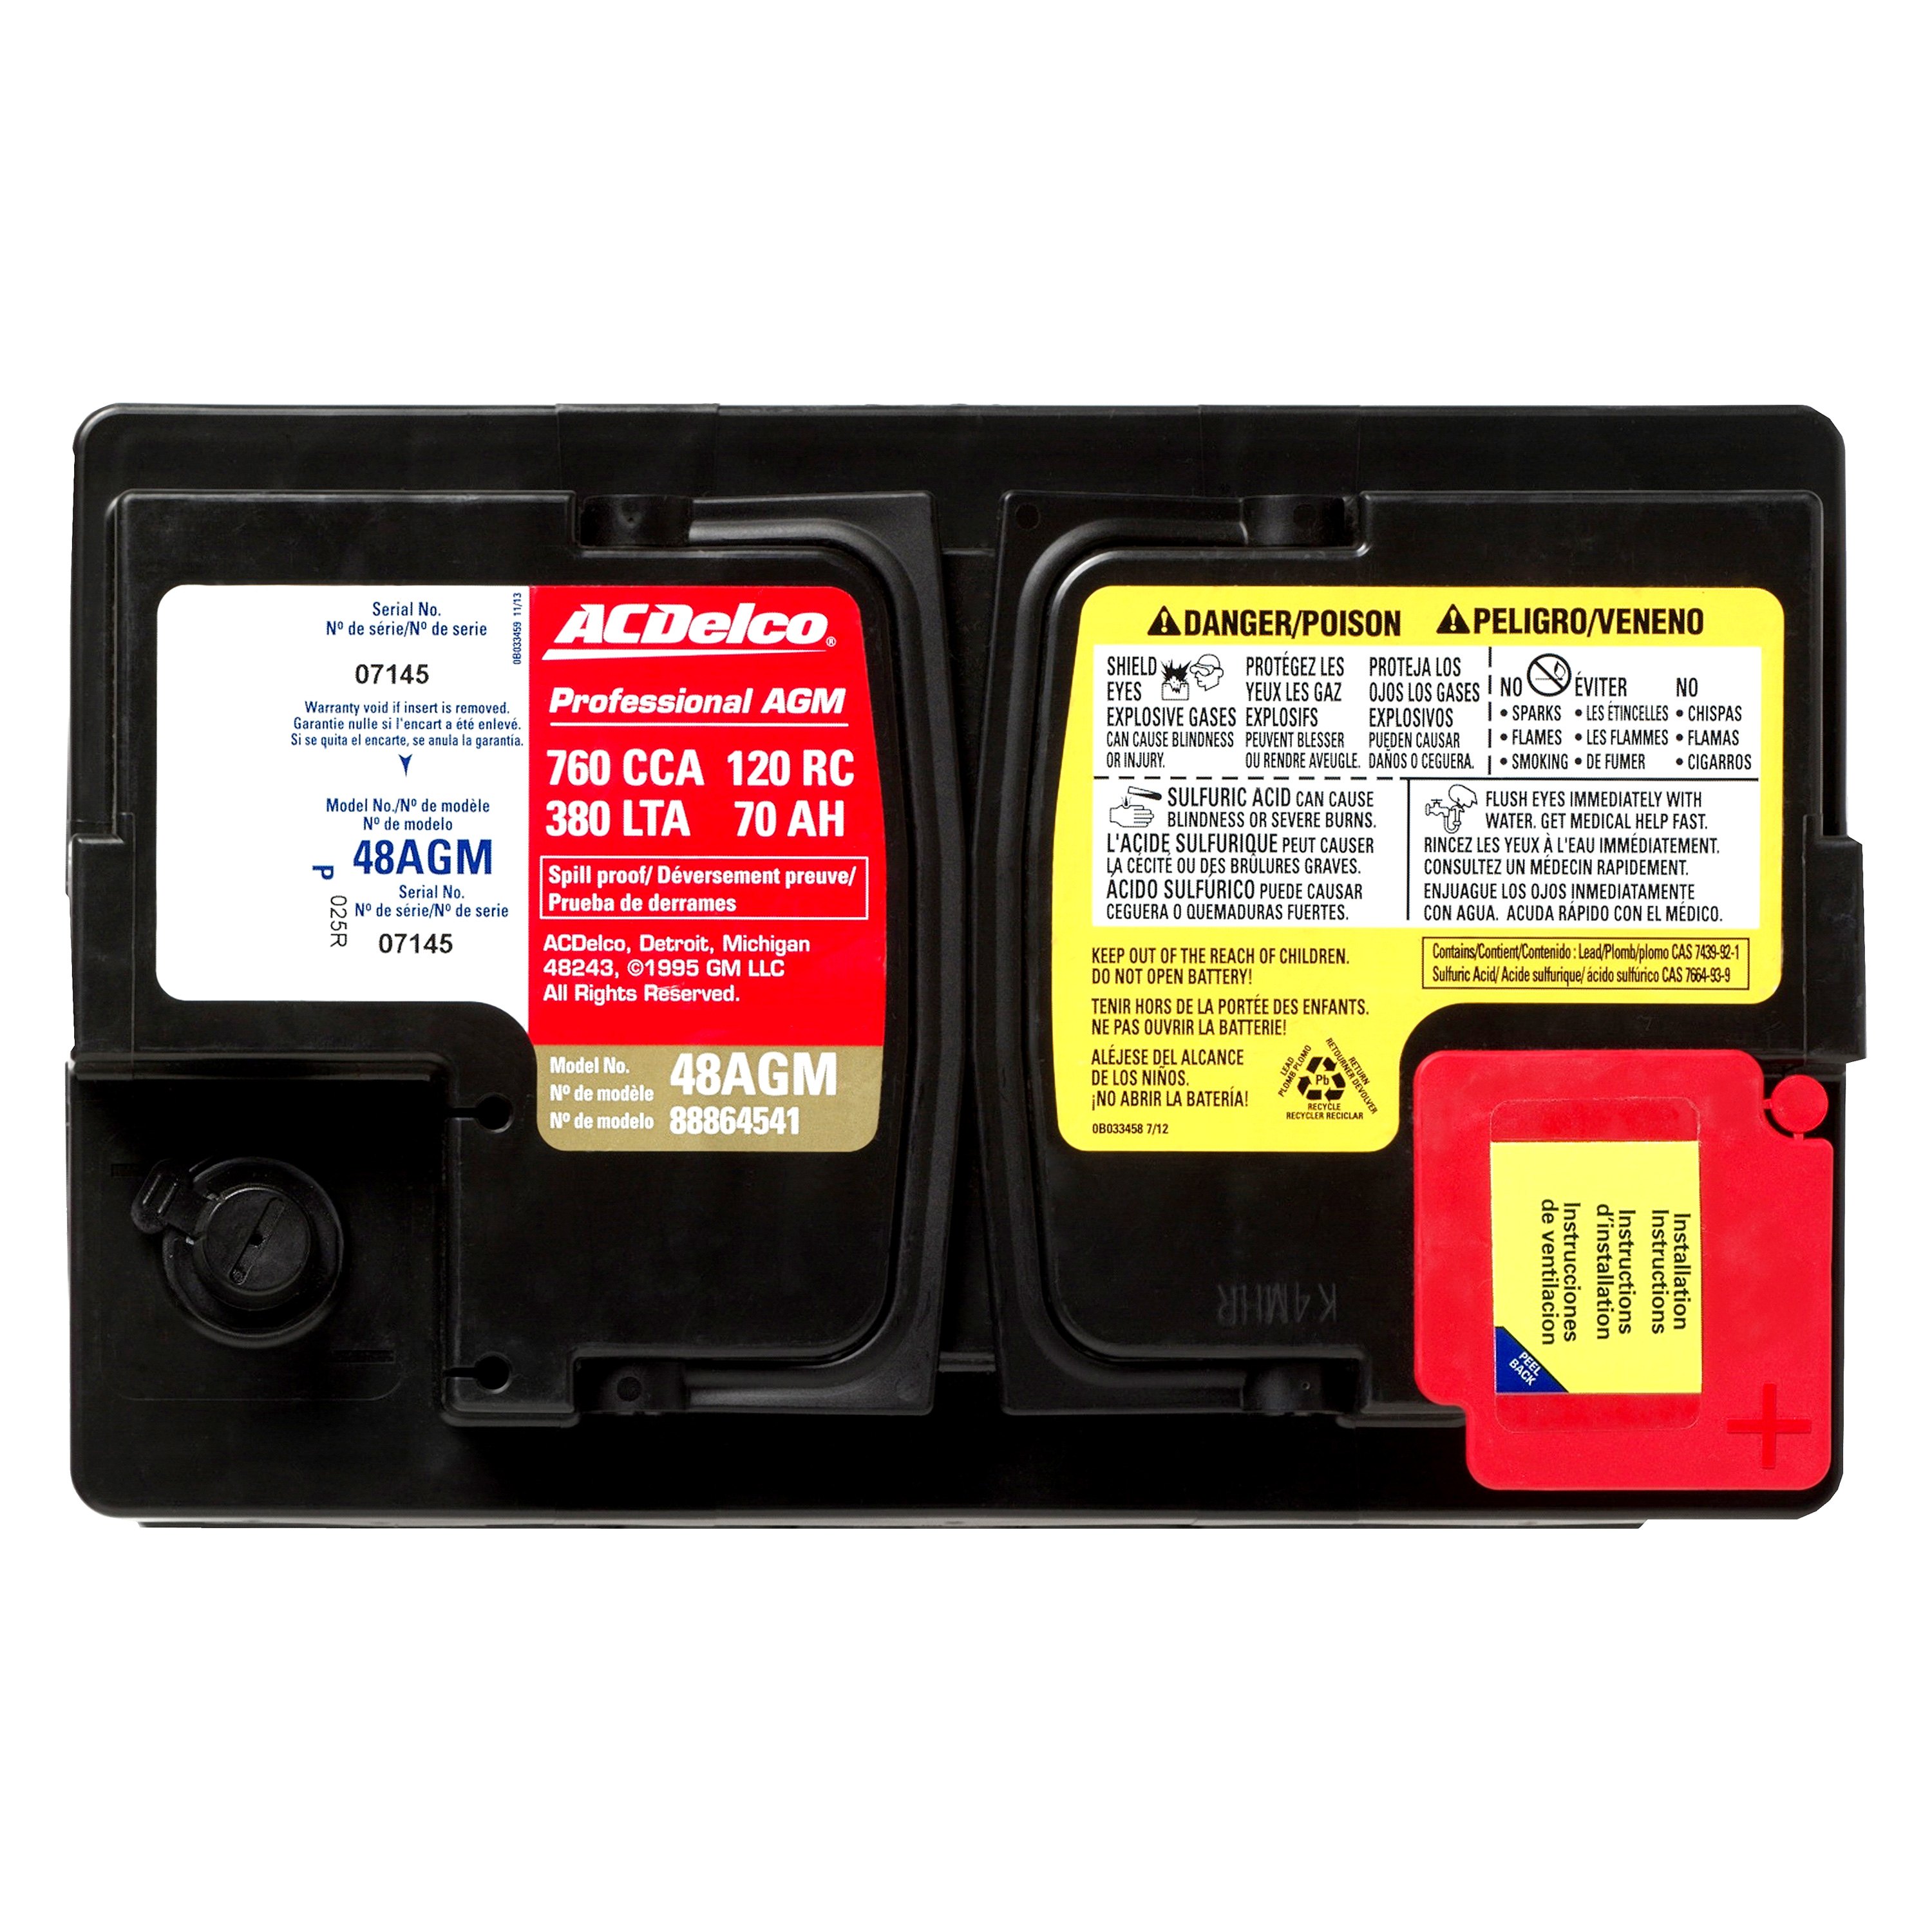 65-48/H6-AGM battery  Interstate Batteries